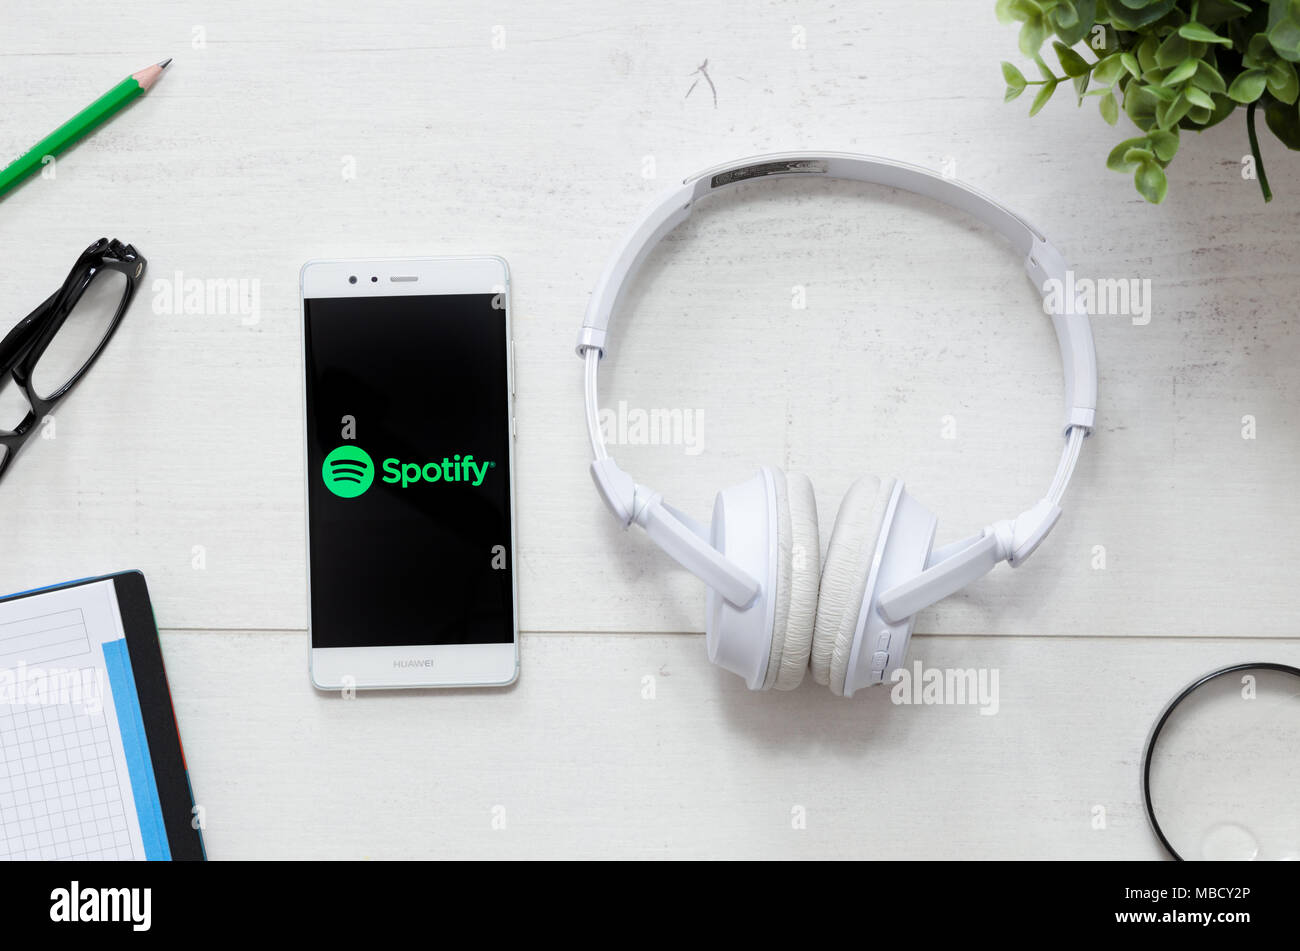 WROCLAW, POLAND - MARCH 29, 2018: Spotify is a music service that offers legal streaming music. Smartphone with Spotify logo on desk. Stock Photo